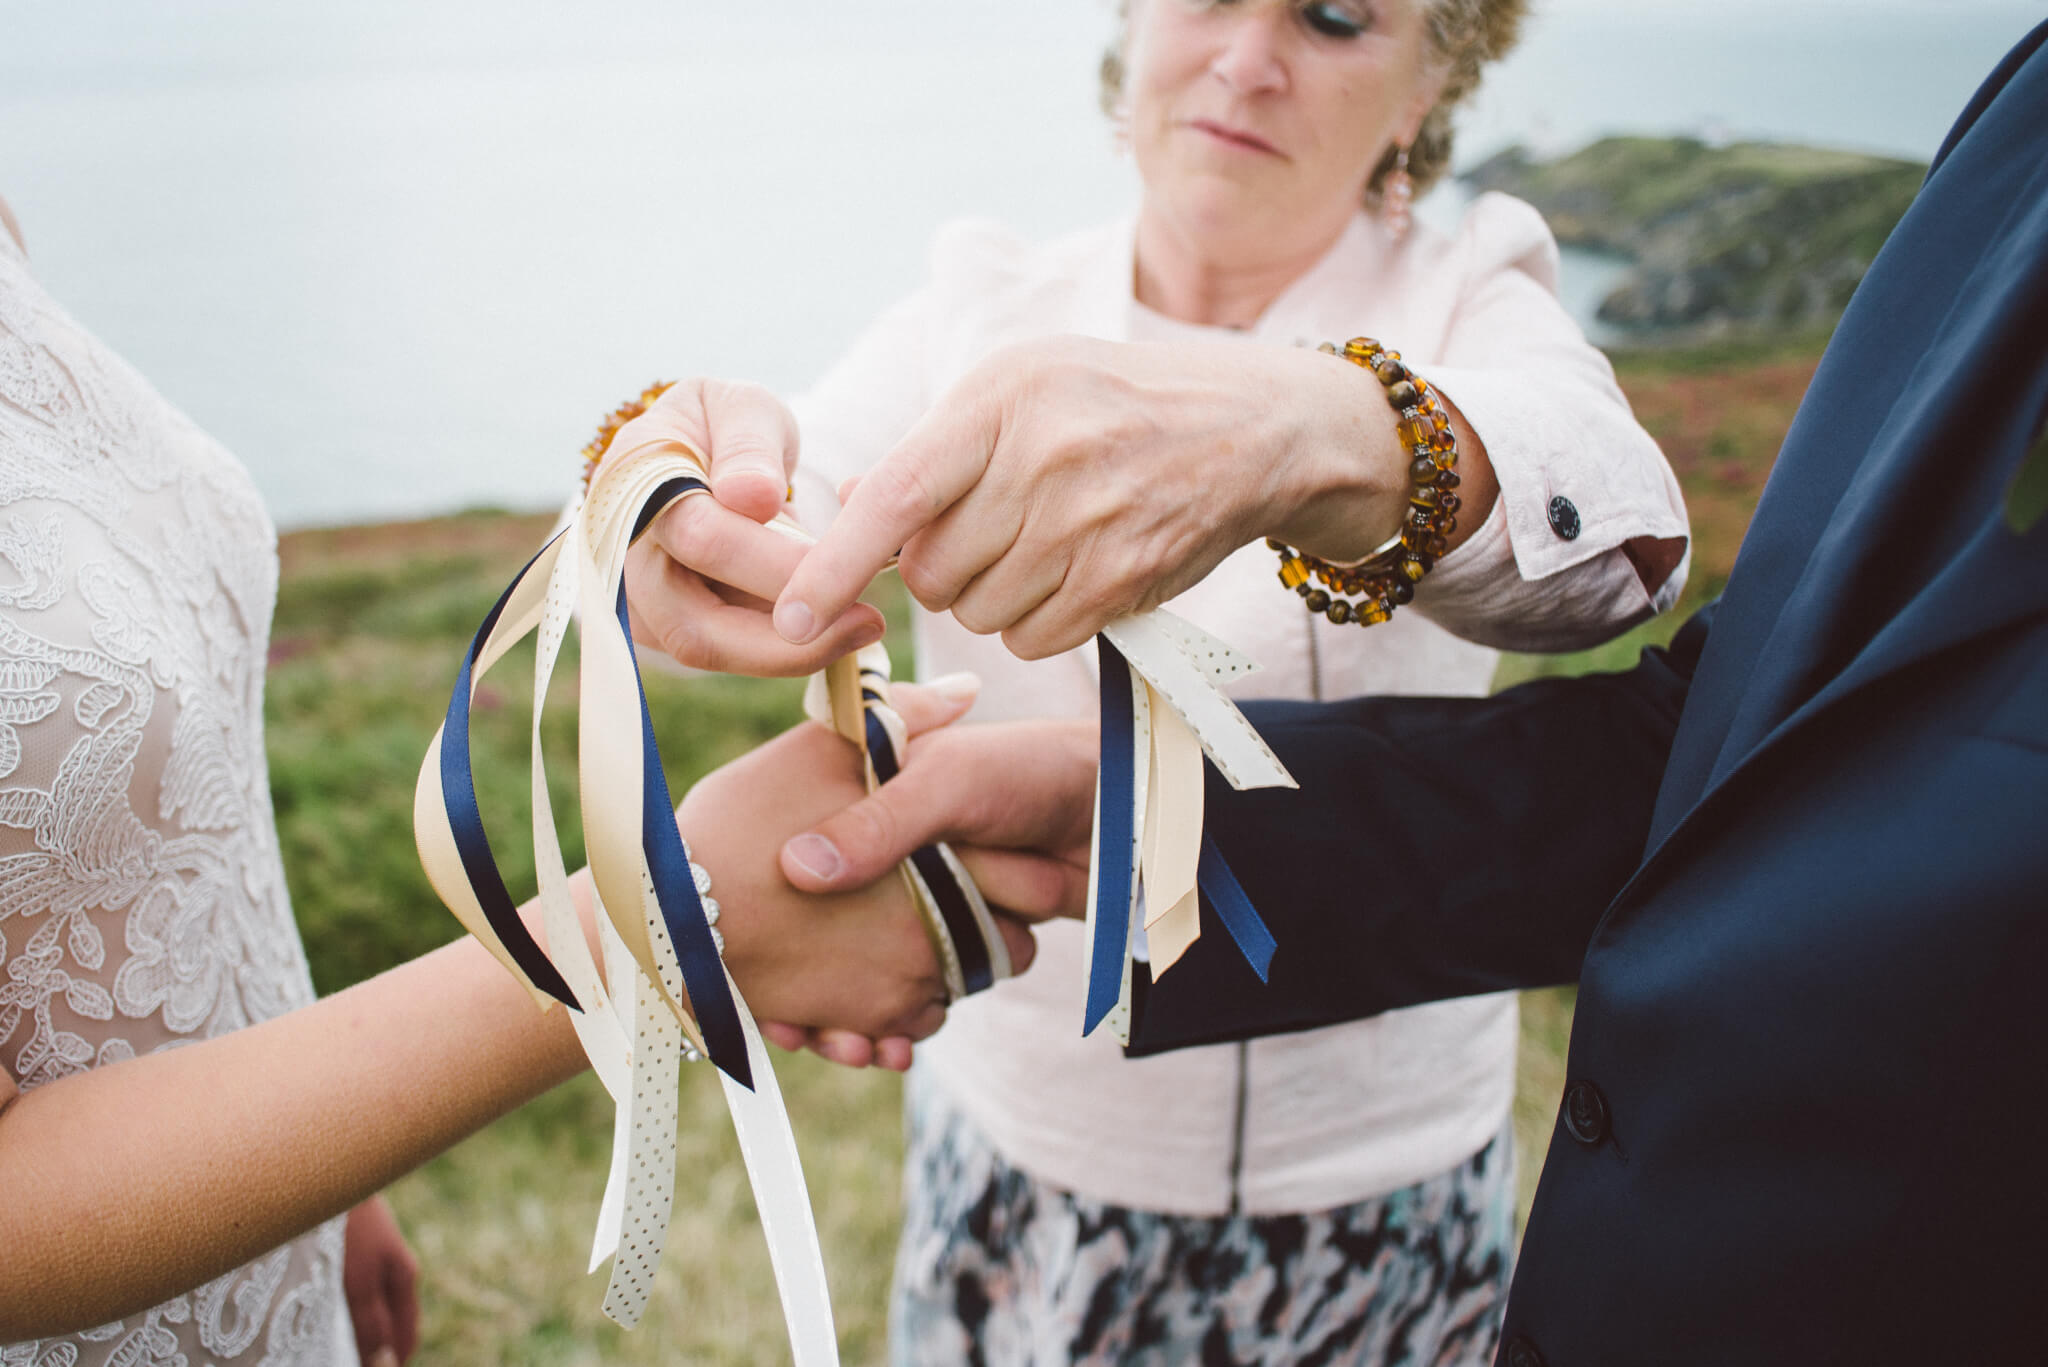 How to Include a Handfasting in Your Wedding Ceremony or Vow Renewal